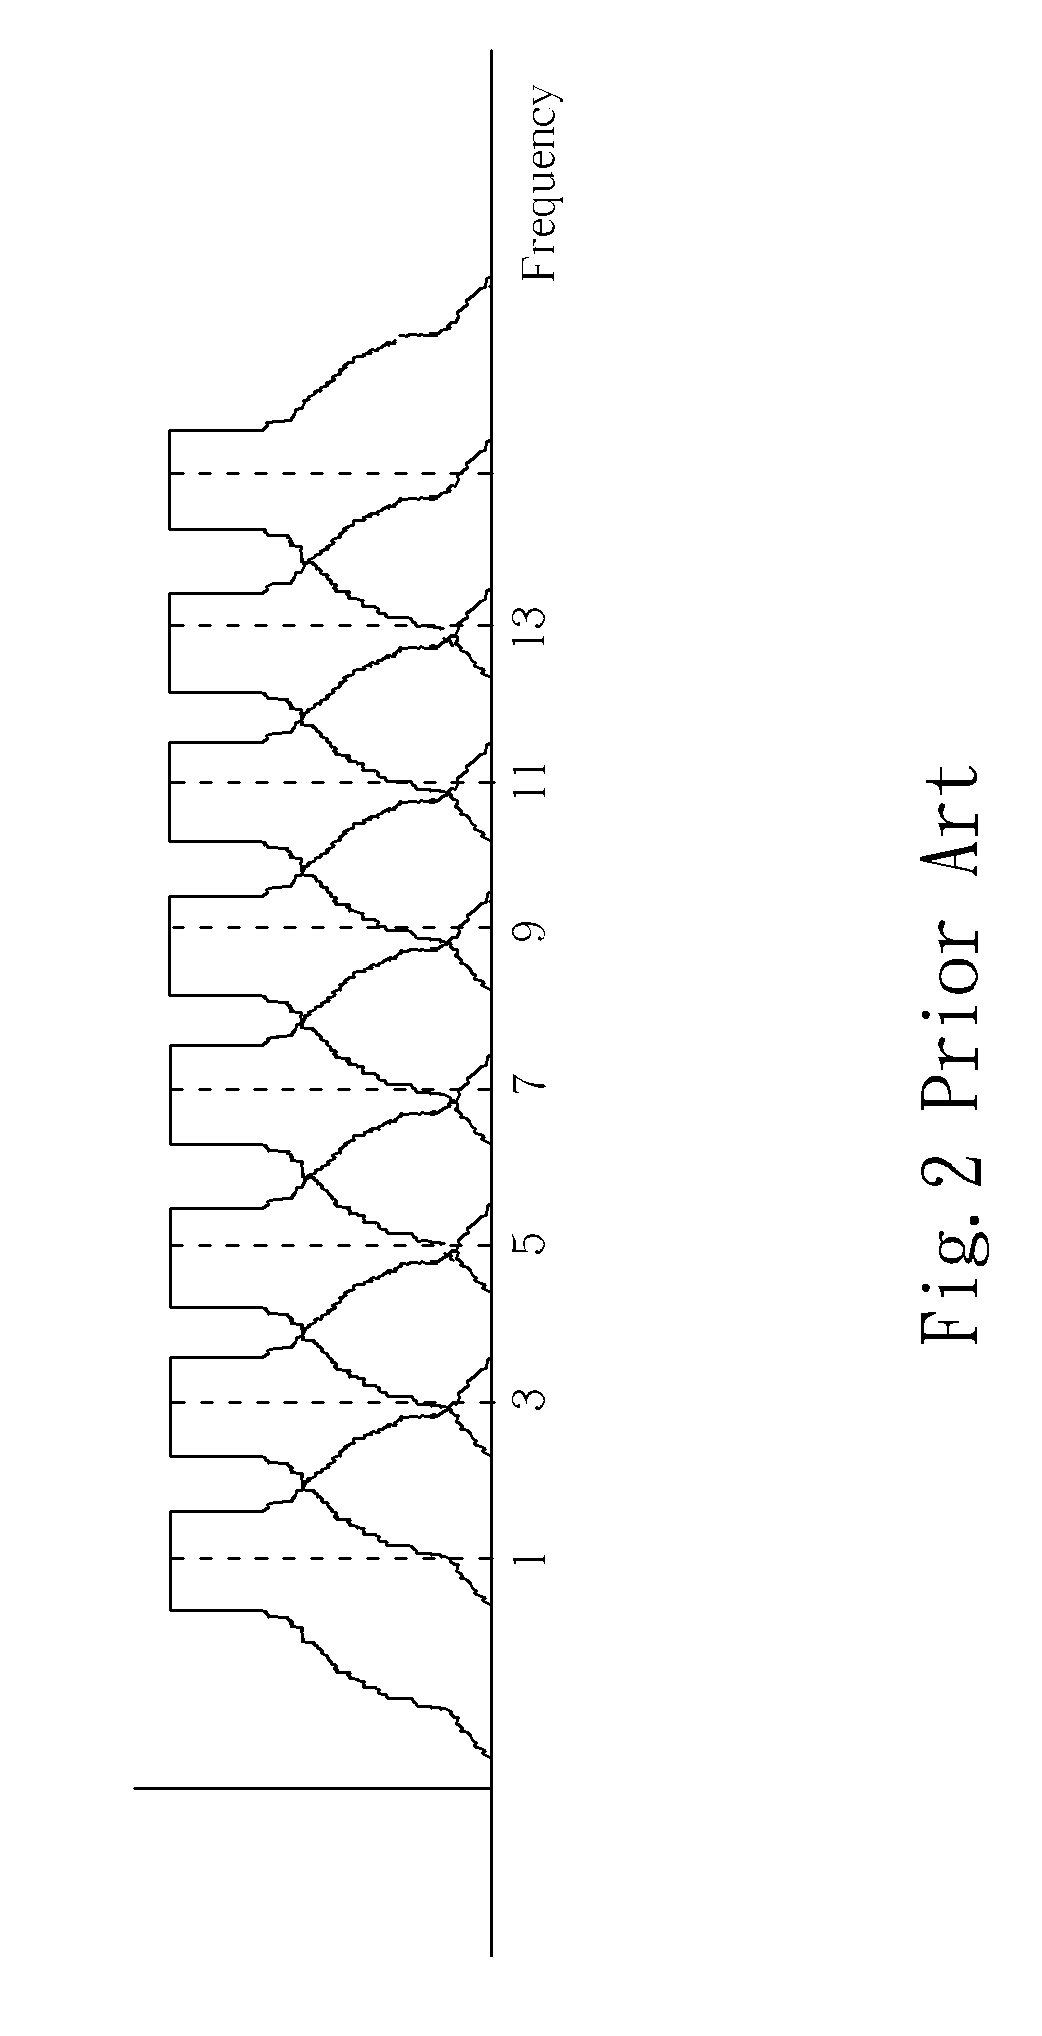 Interference-resistant wireless audio system and the method thereof